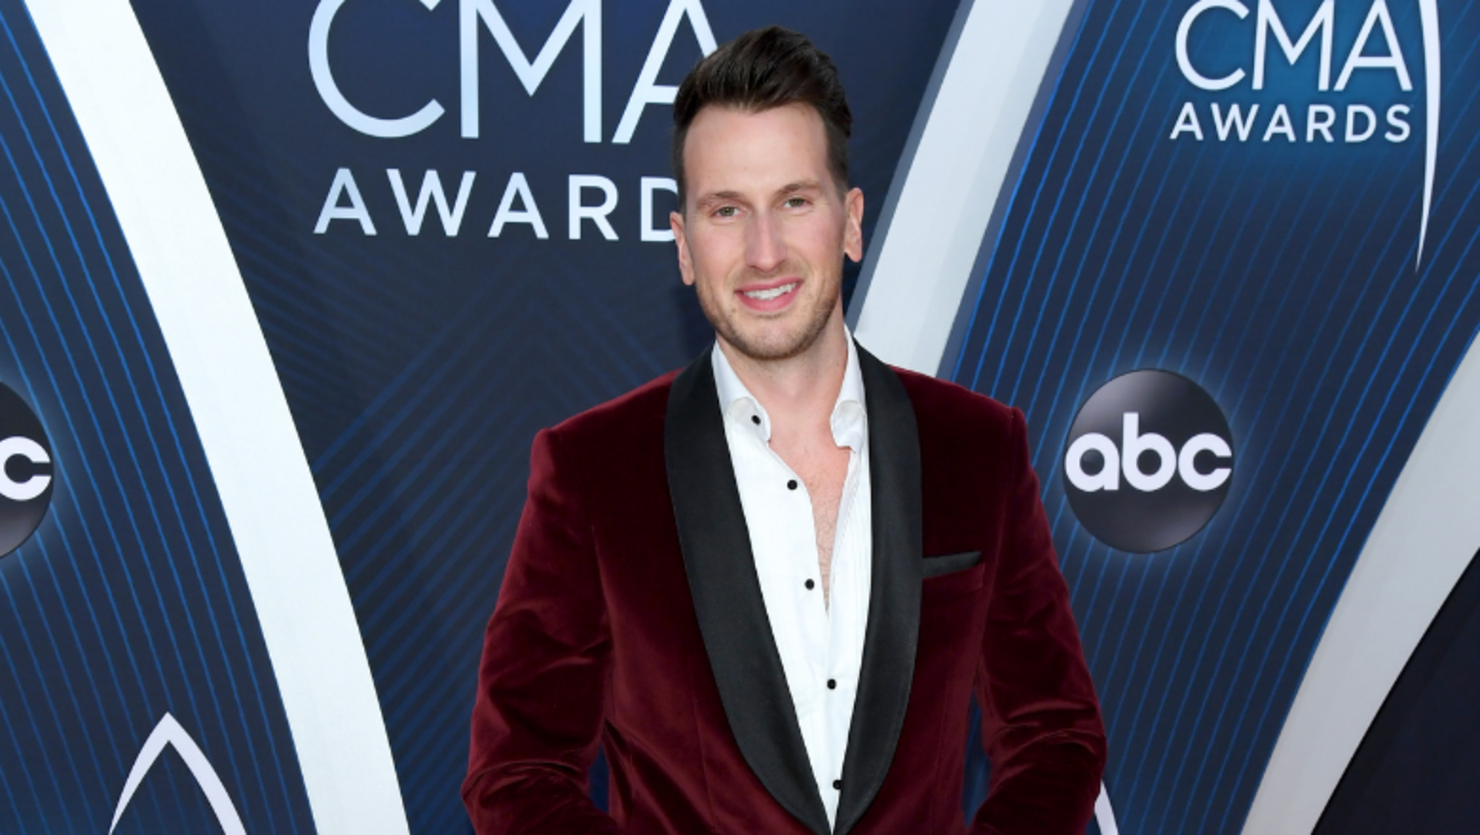 Russell Dickerson Shares Adorable Video Of Newborn Son With The Hiccups